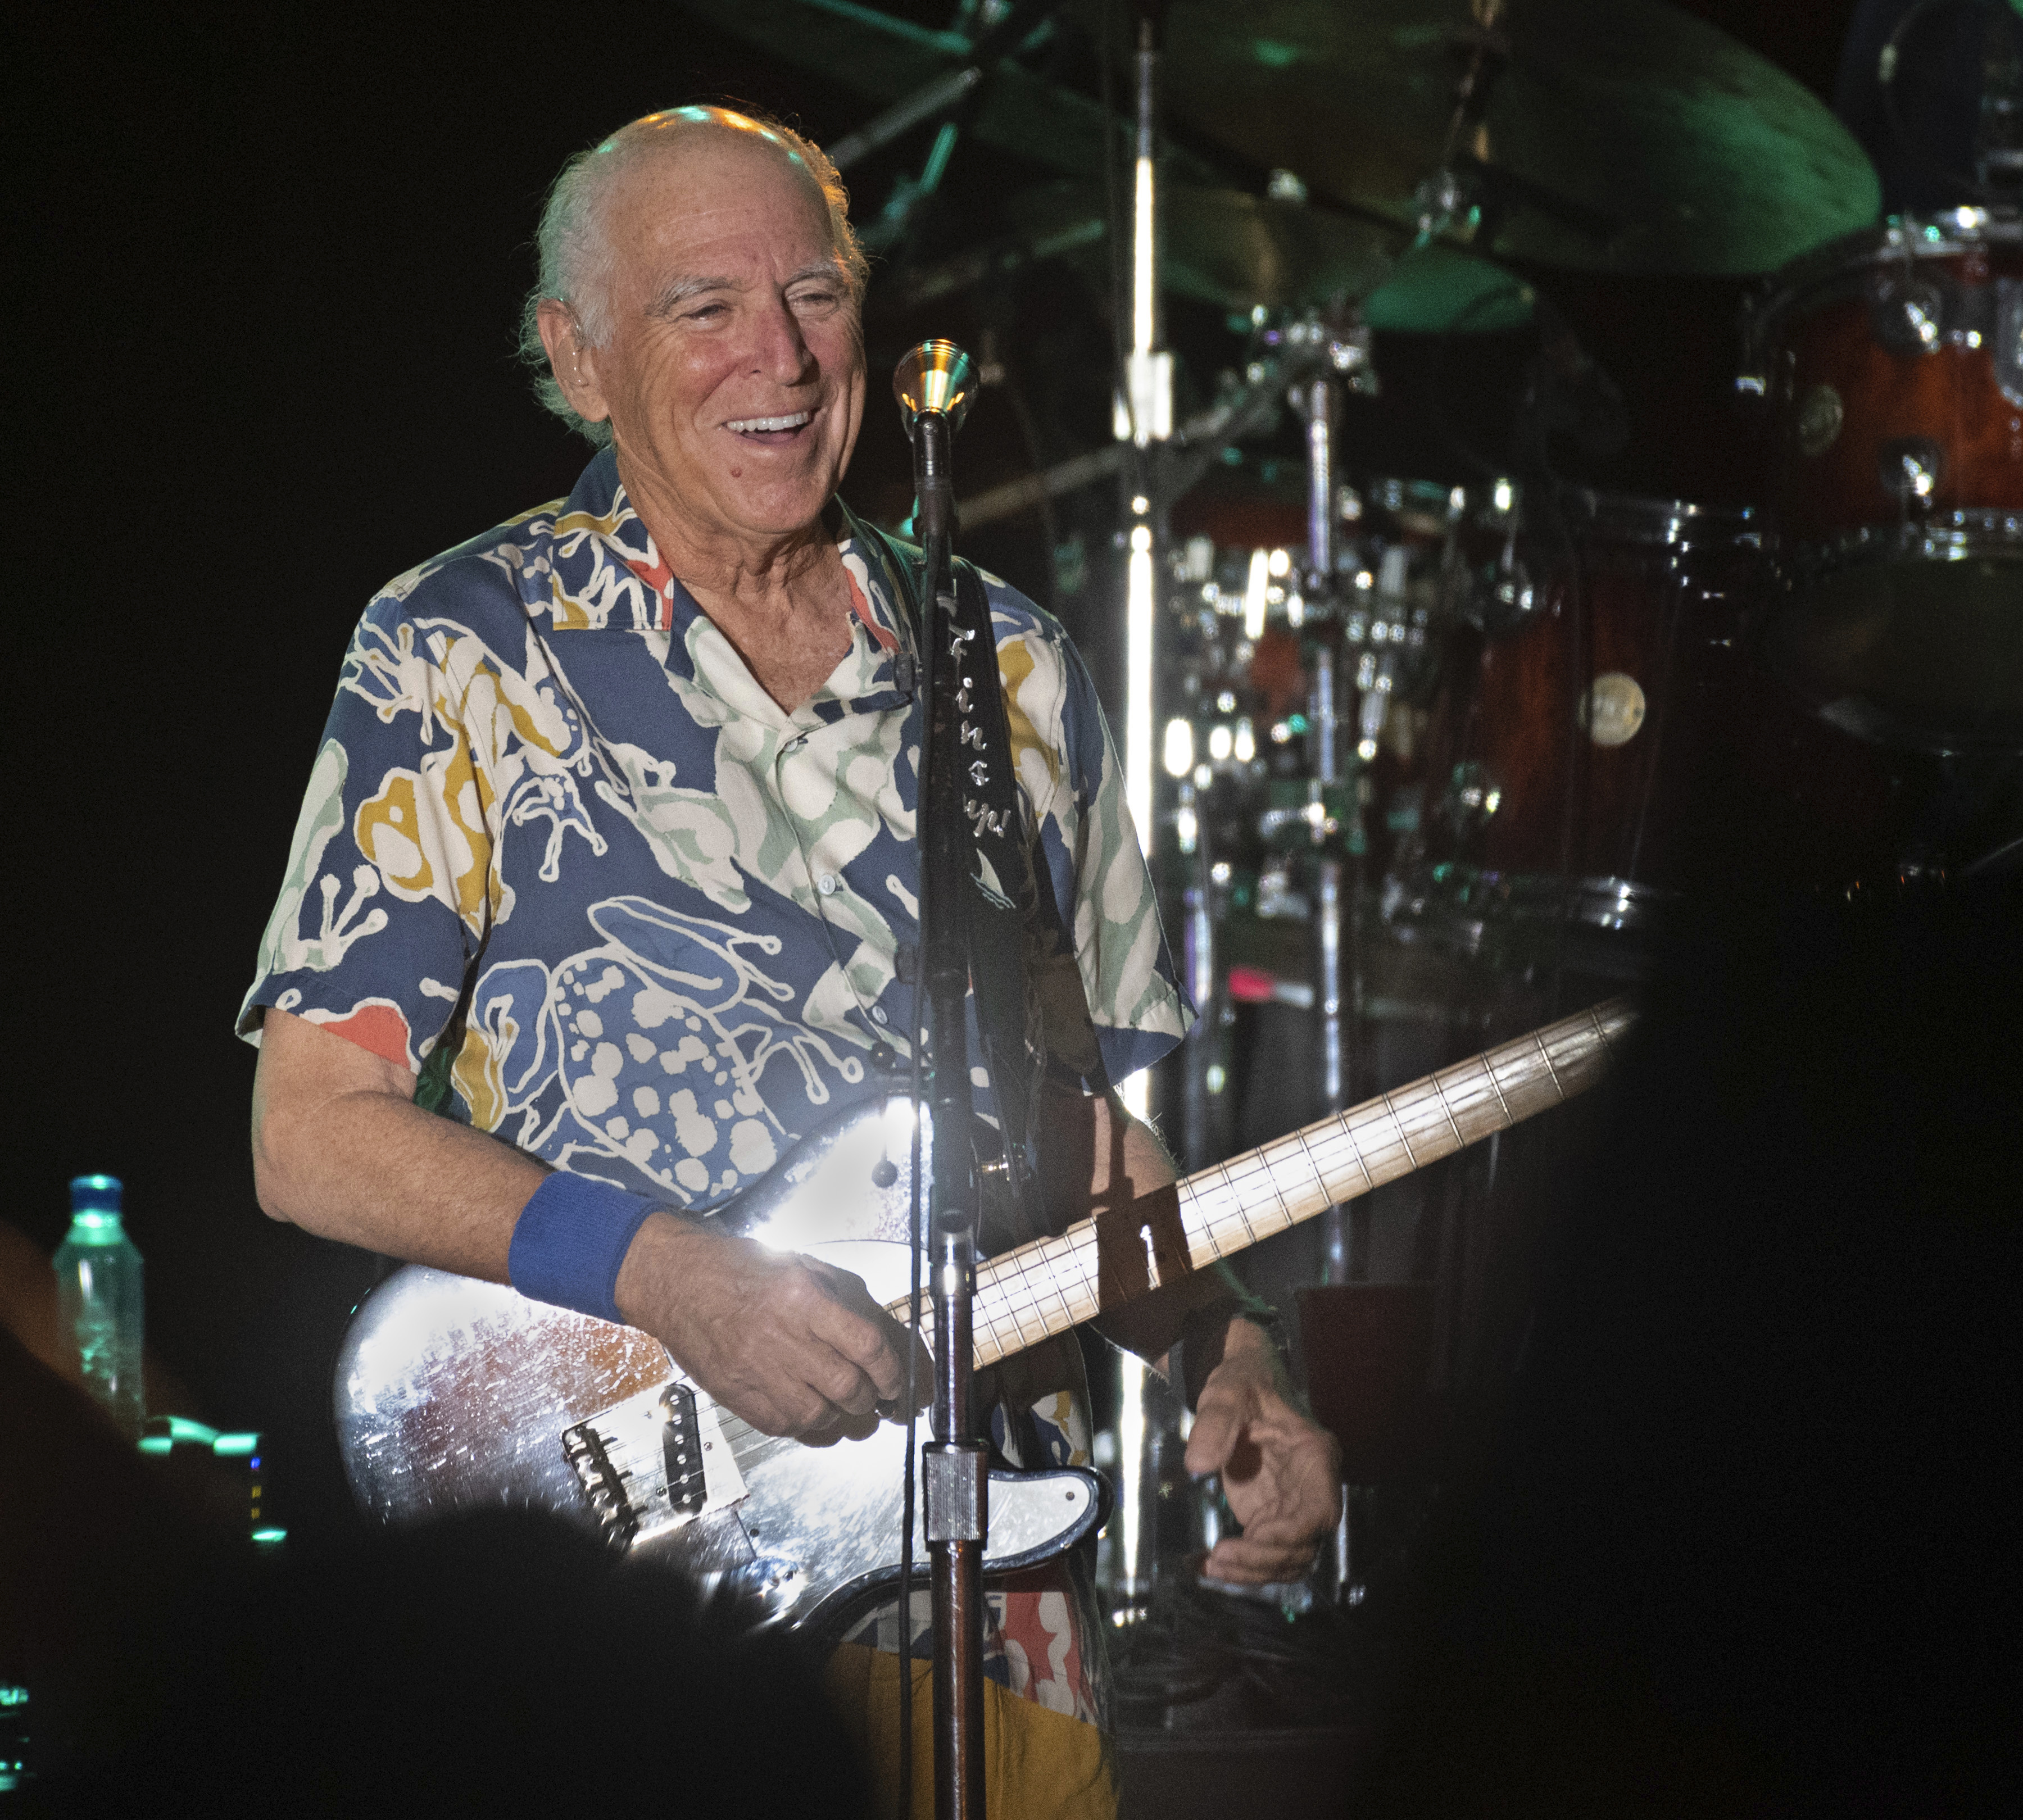 Singer-songwriter Jimmy Buffett performs during a concert in Key West, Florida on Thursday, Feb. 9, 2023